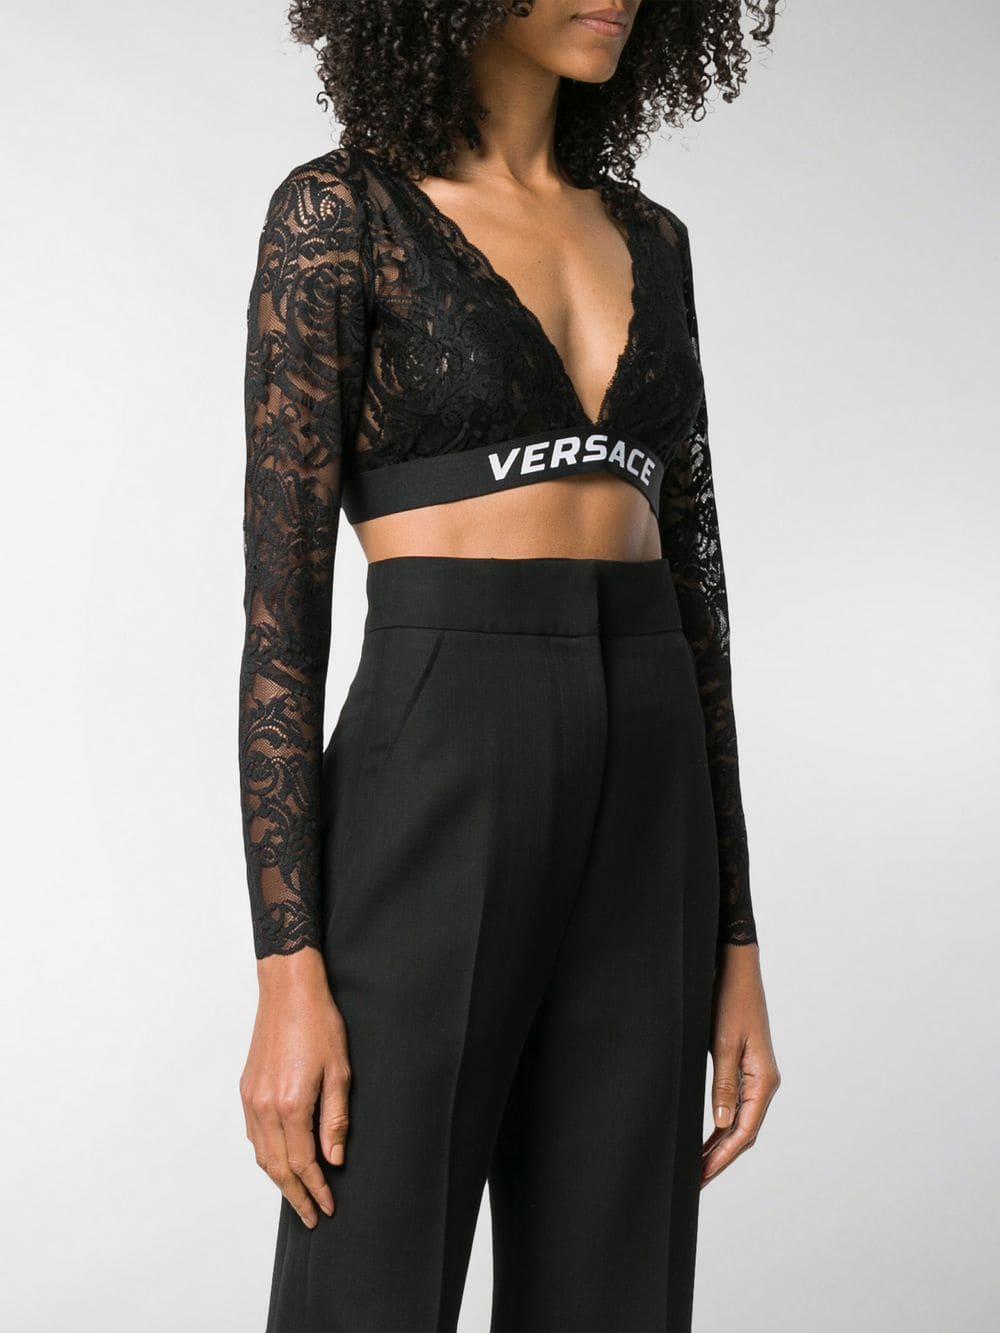 Versace Lace Cropped T-shirt in Black | Lyst